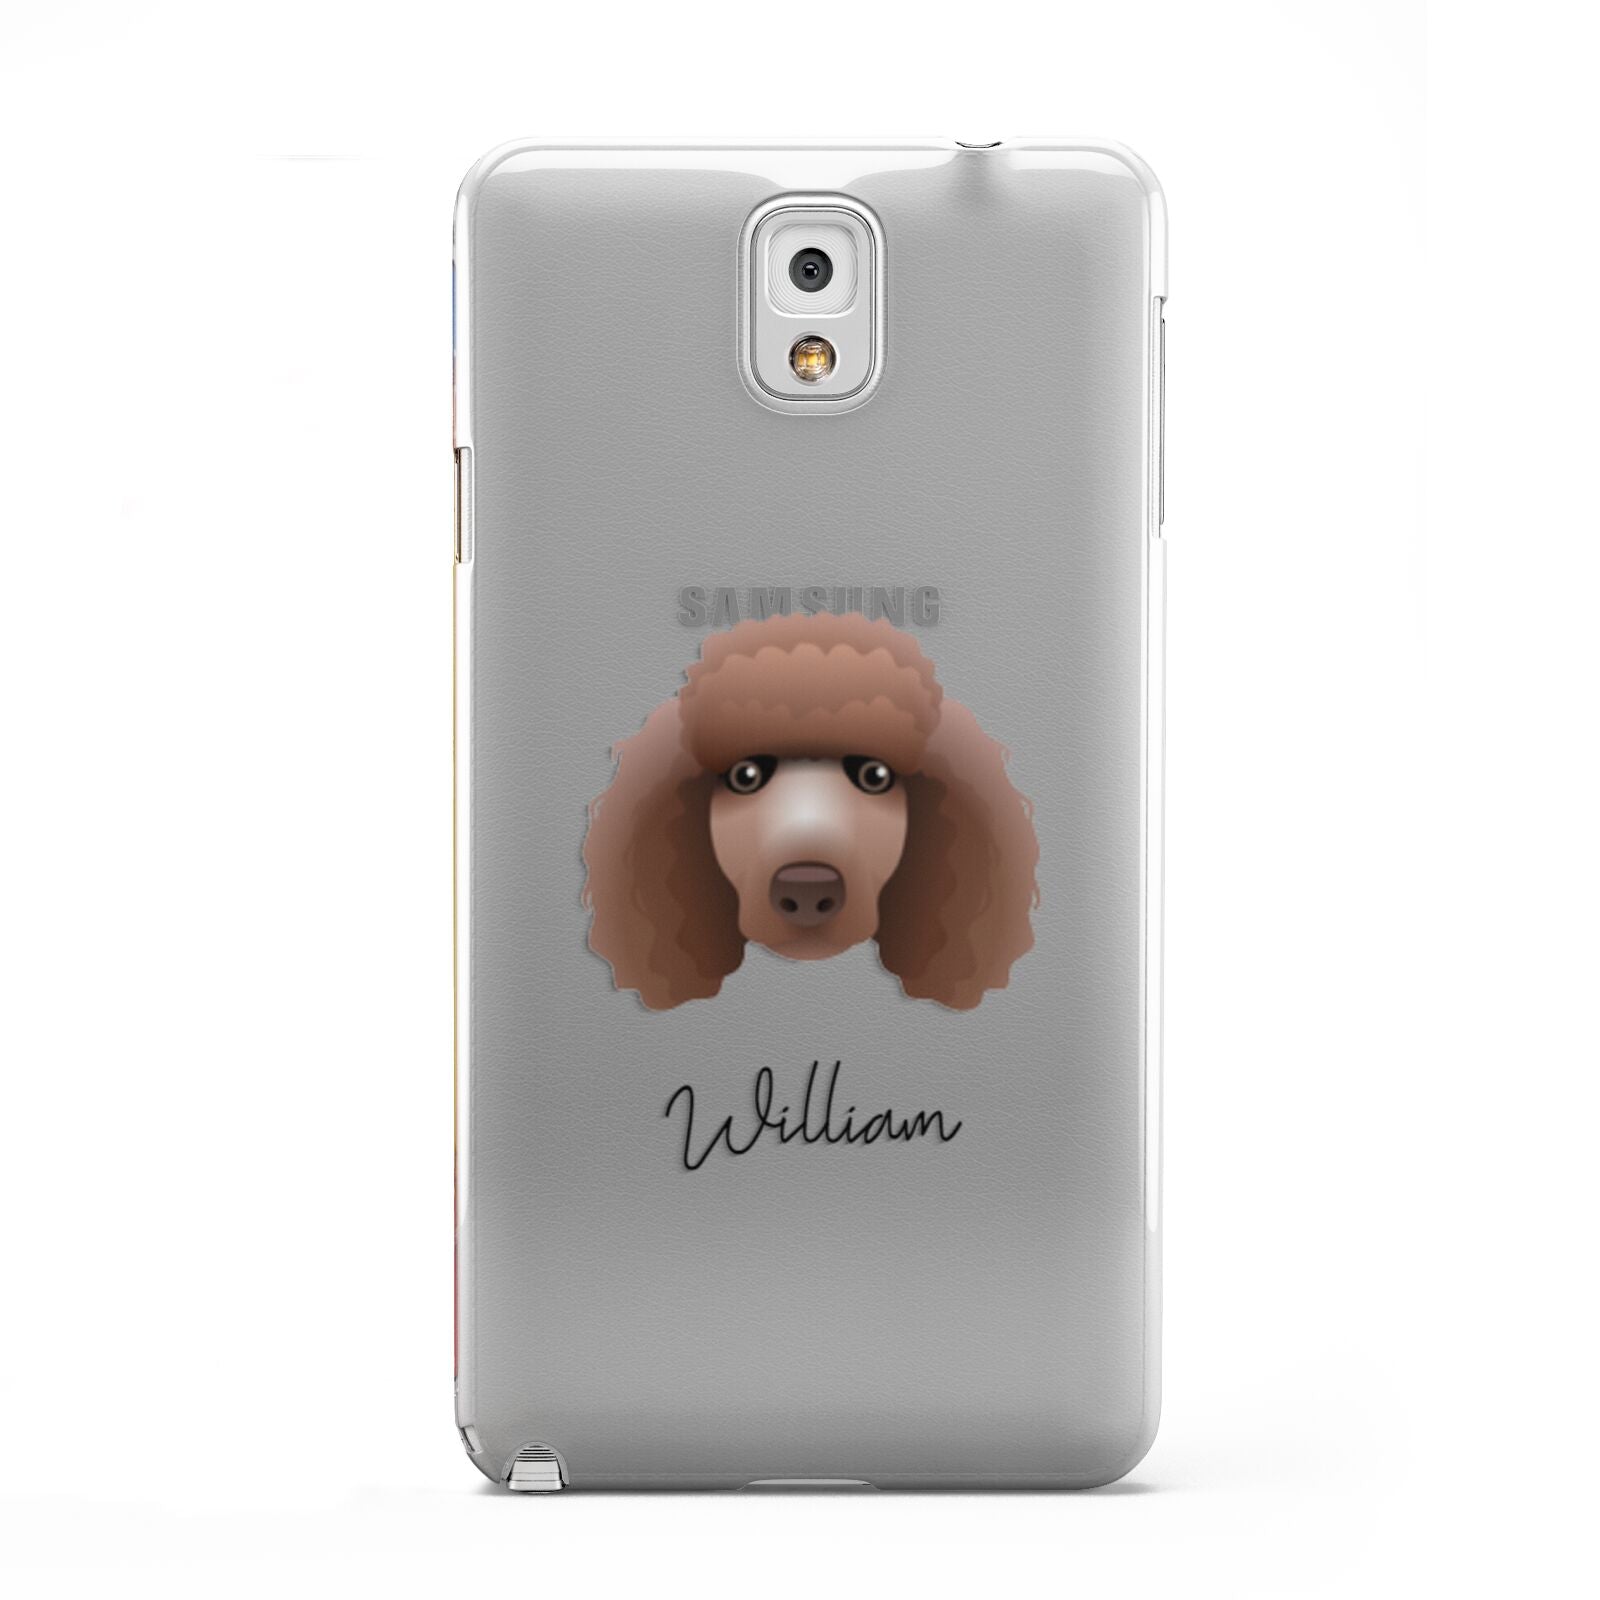 Poodle Personalised Samsung Galaxy Note 3 Case